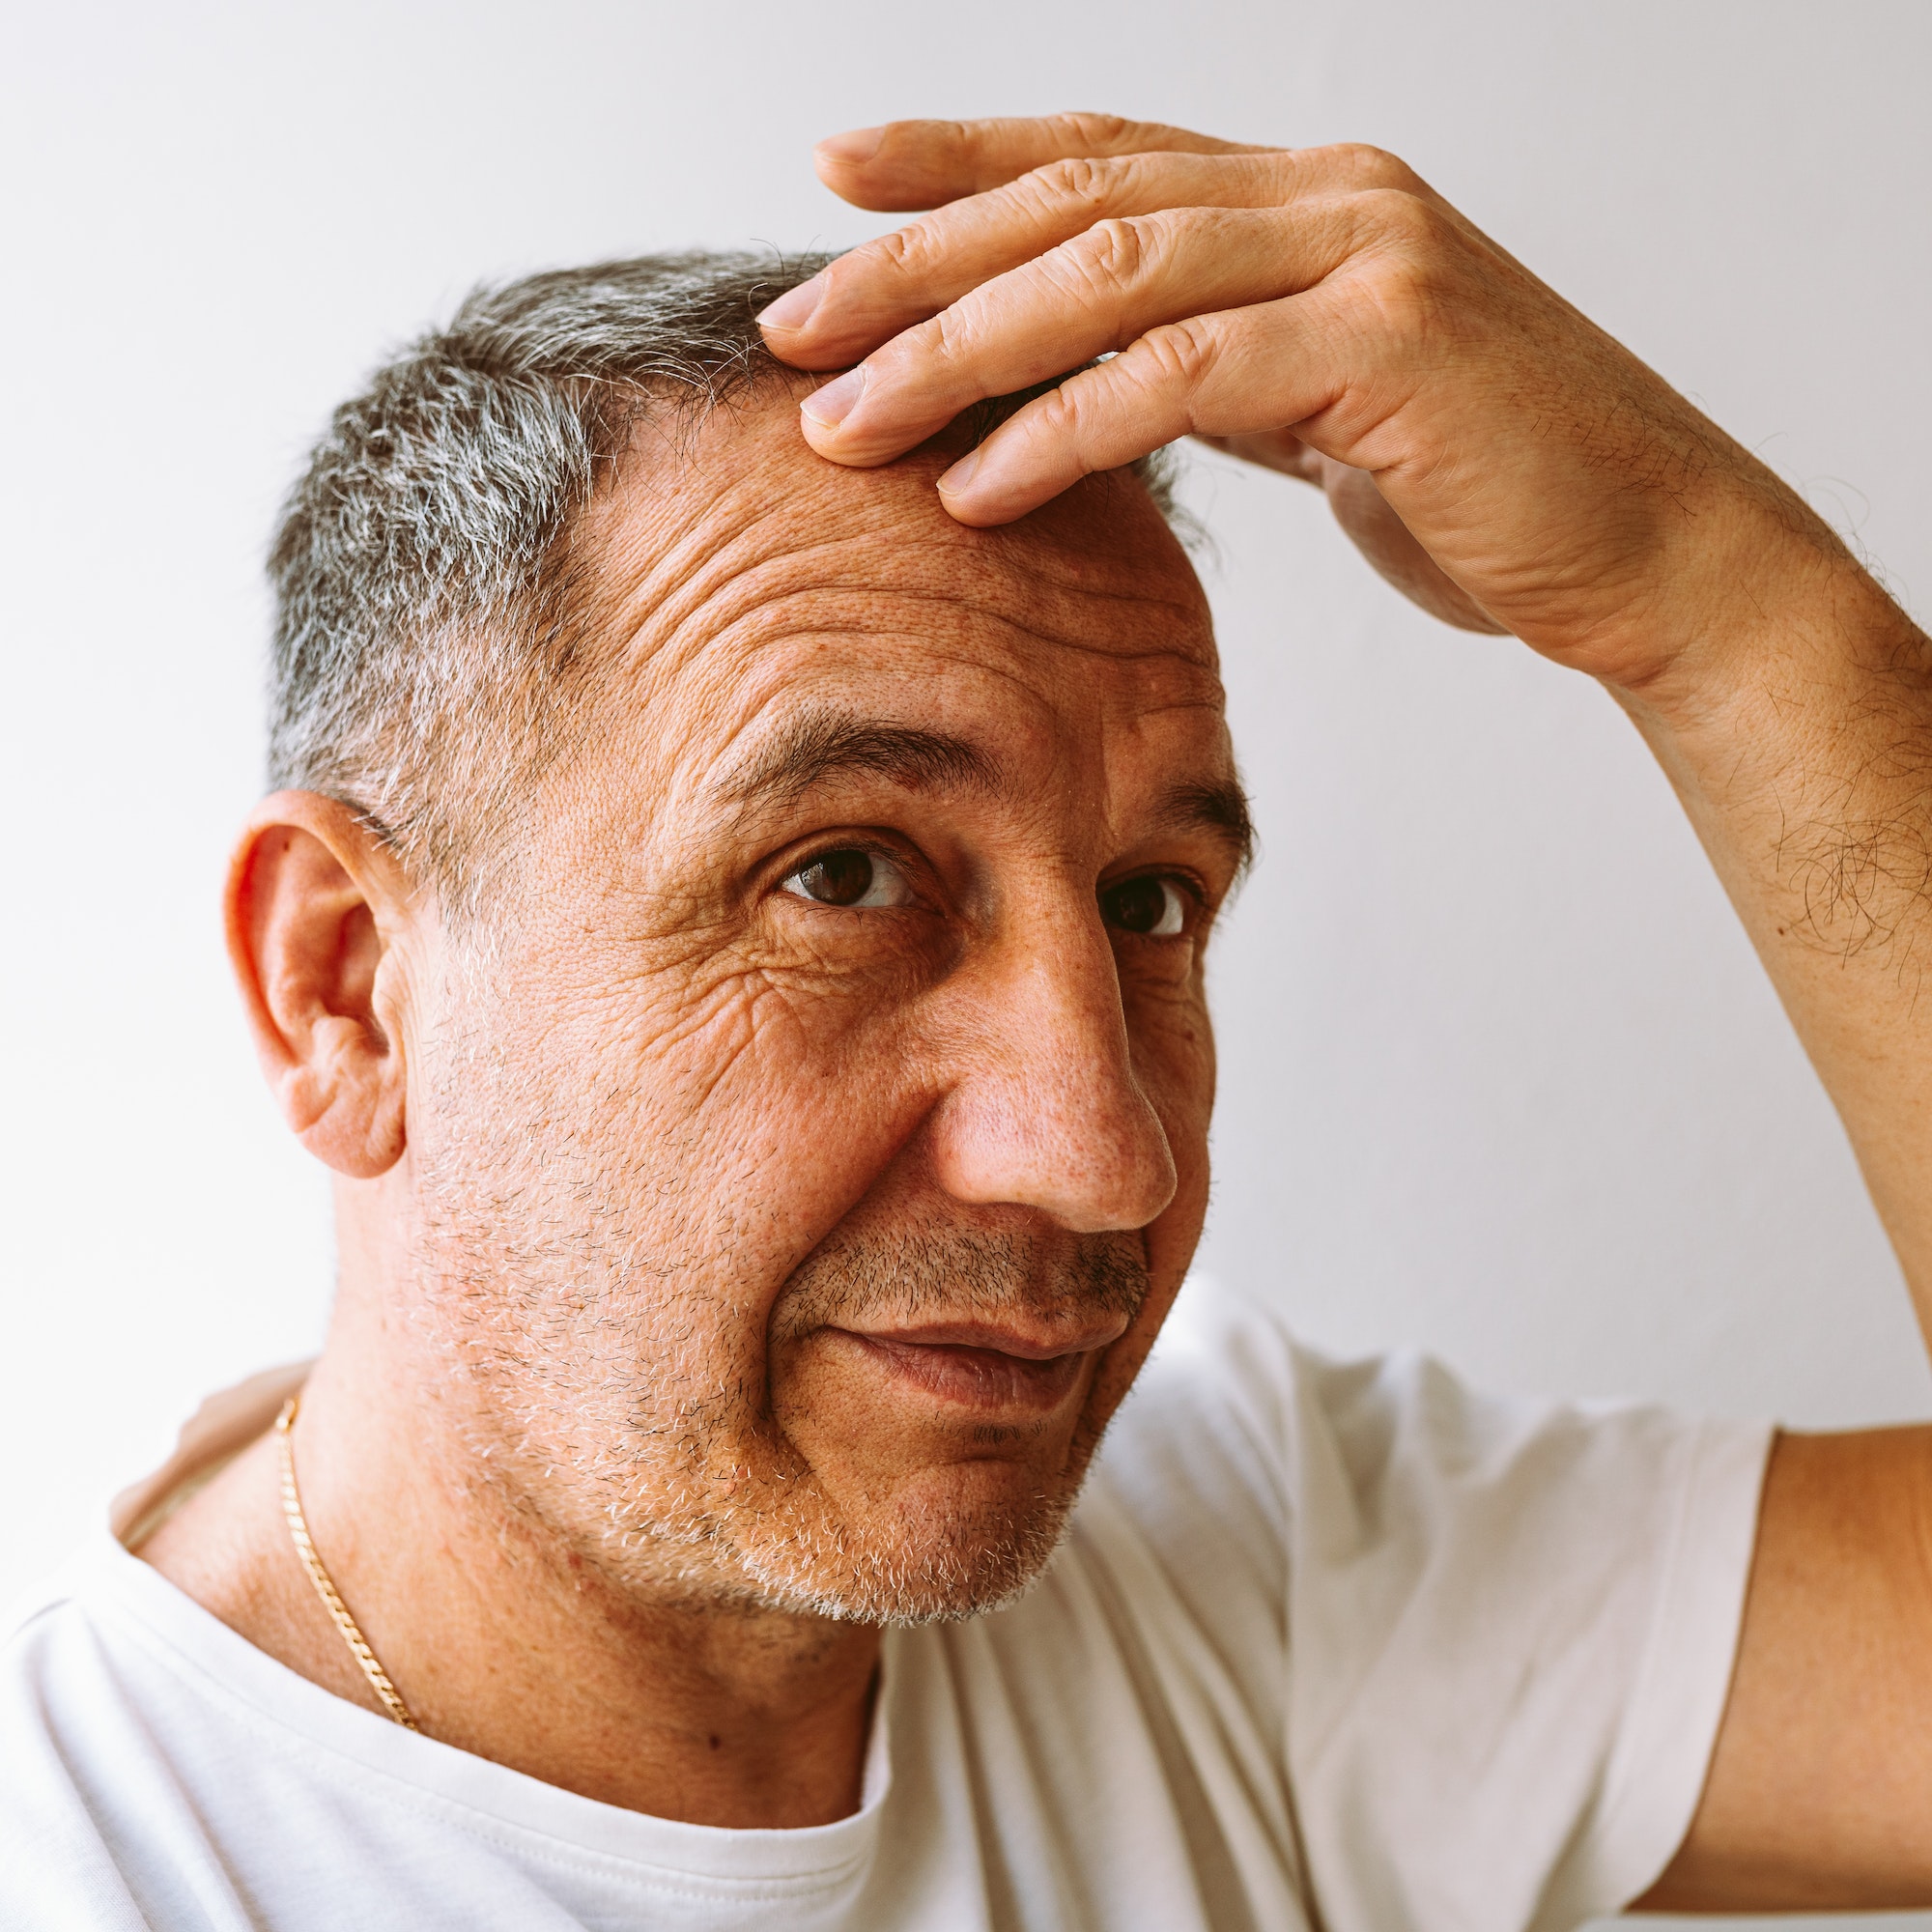 Middle-aged man demonstrates gray hair, hair loss problem, close-up